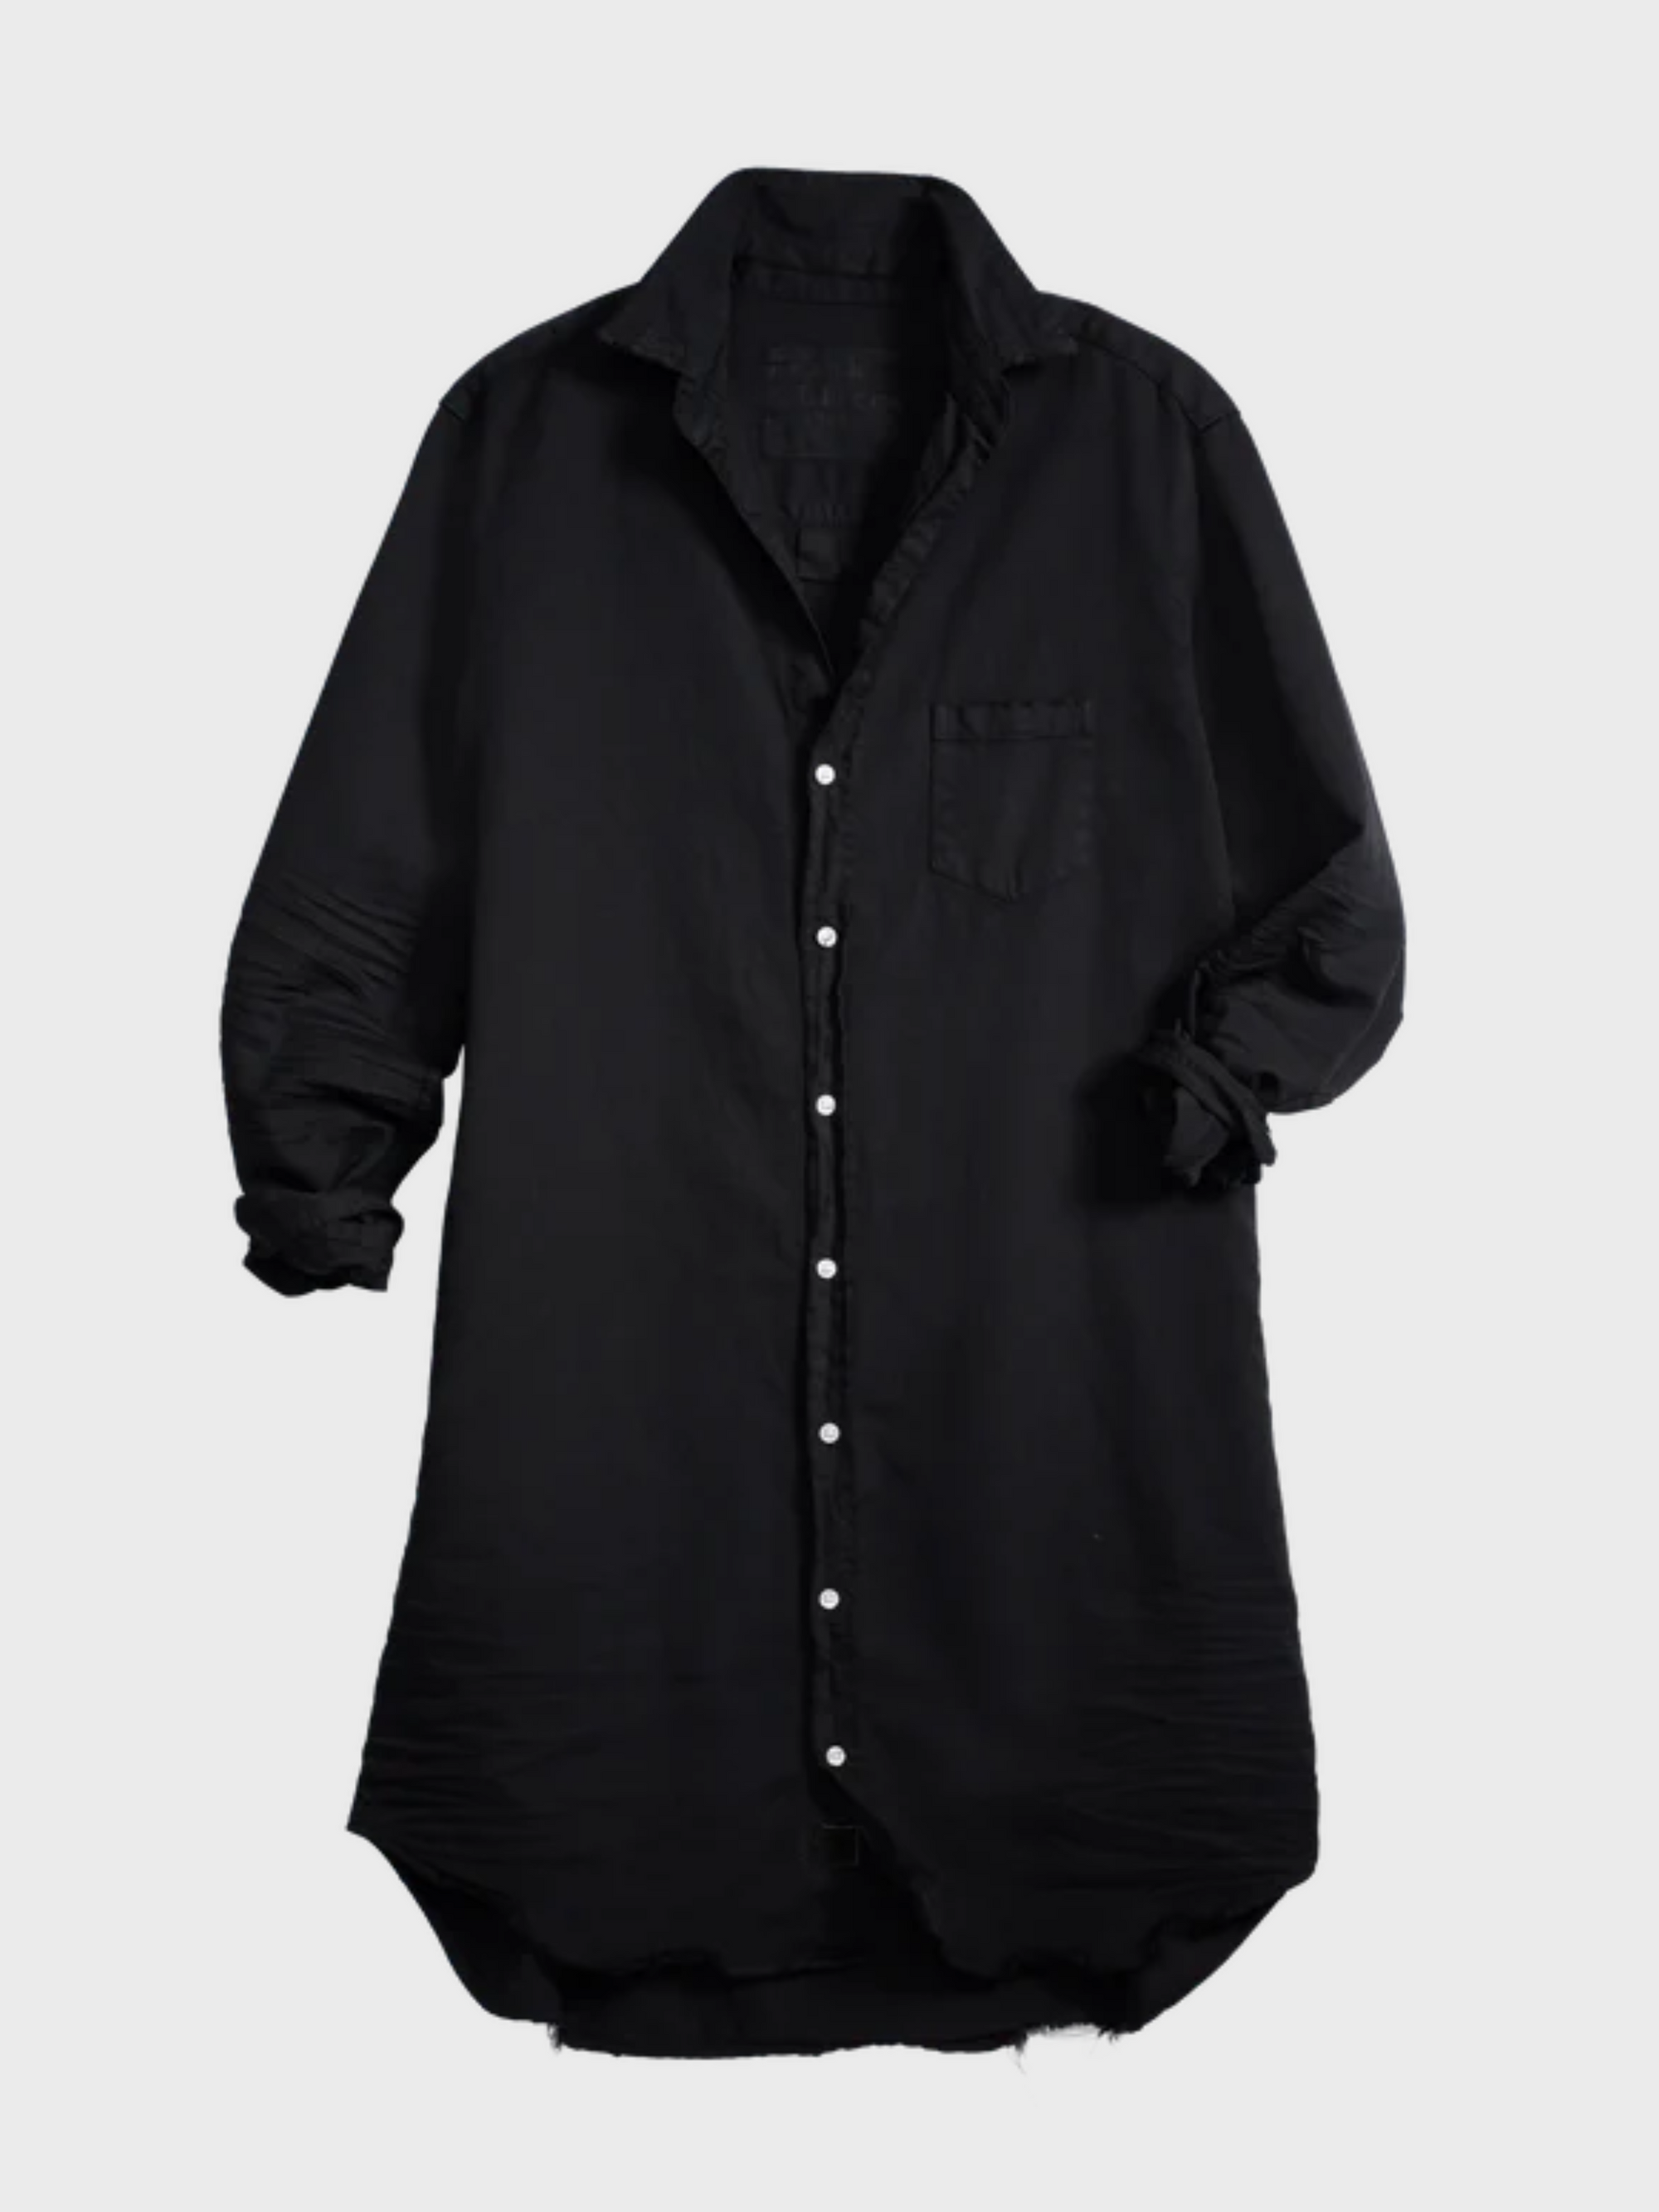 Mary Woven Button Up Shirt Dress- Blackout Denim-Dresses-West of Woodward Boutique-Vancouver-Canada